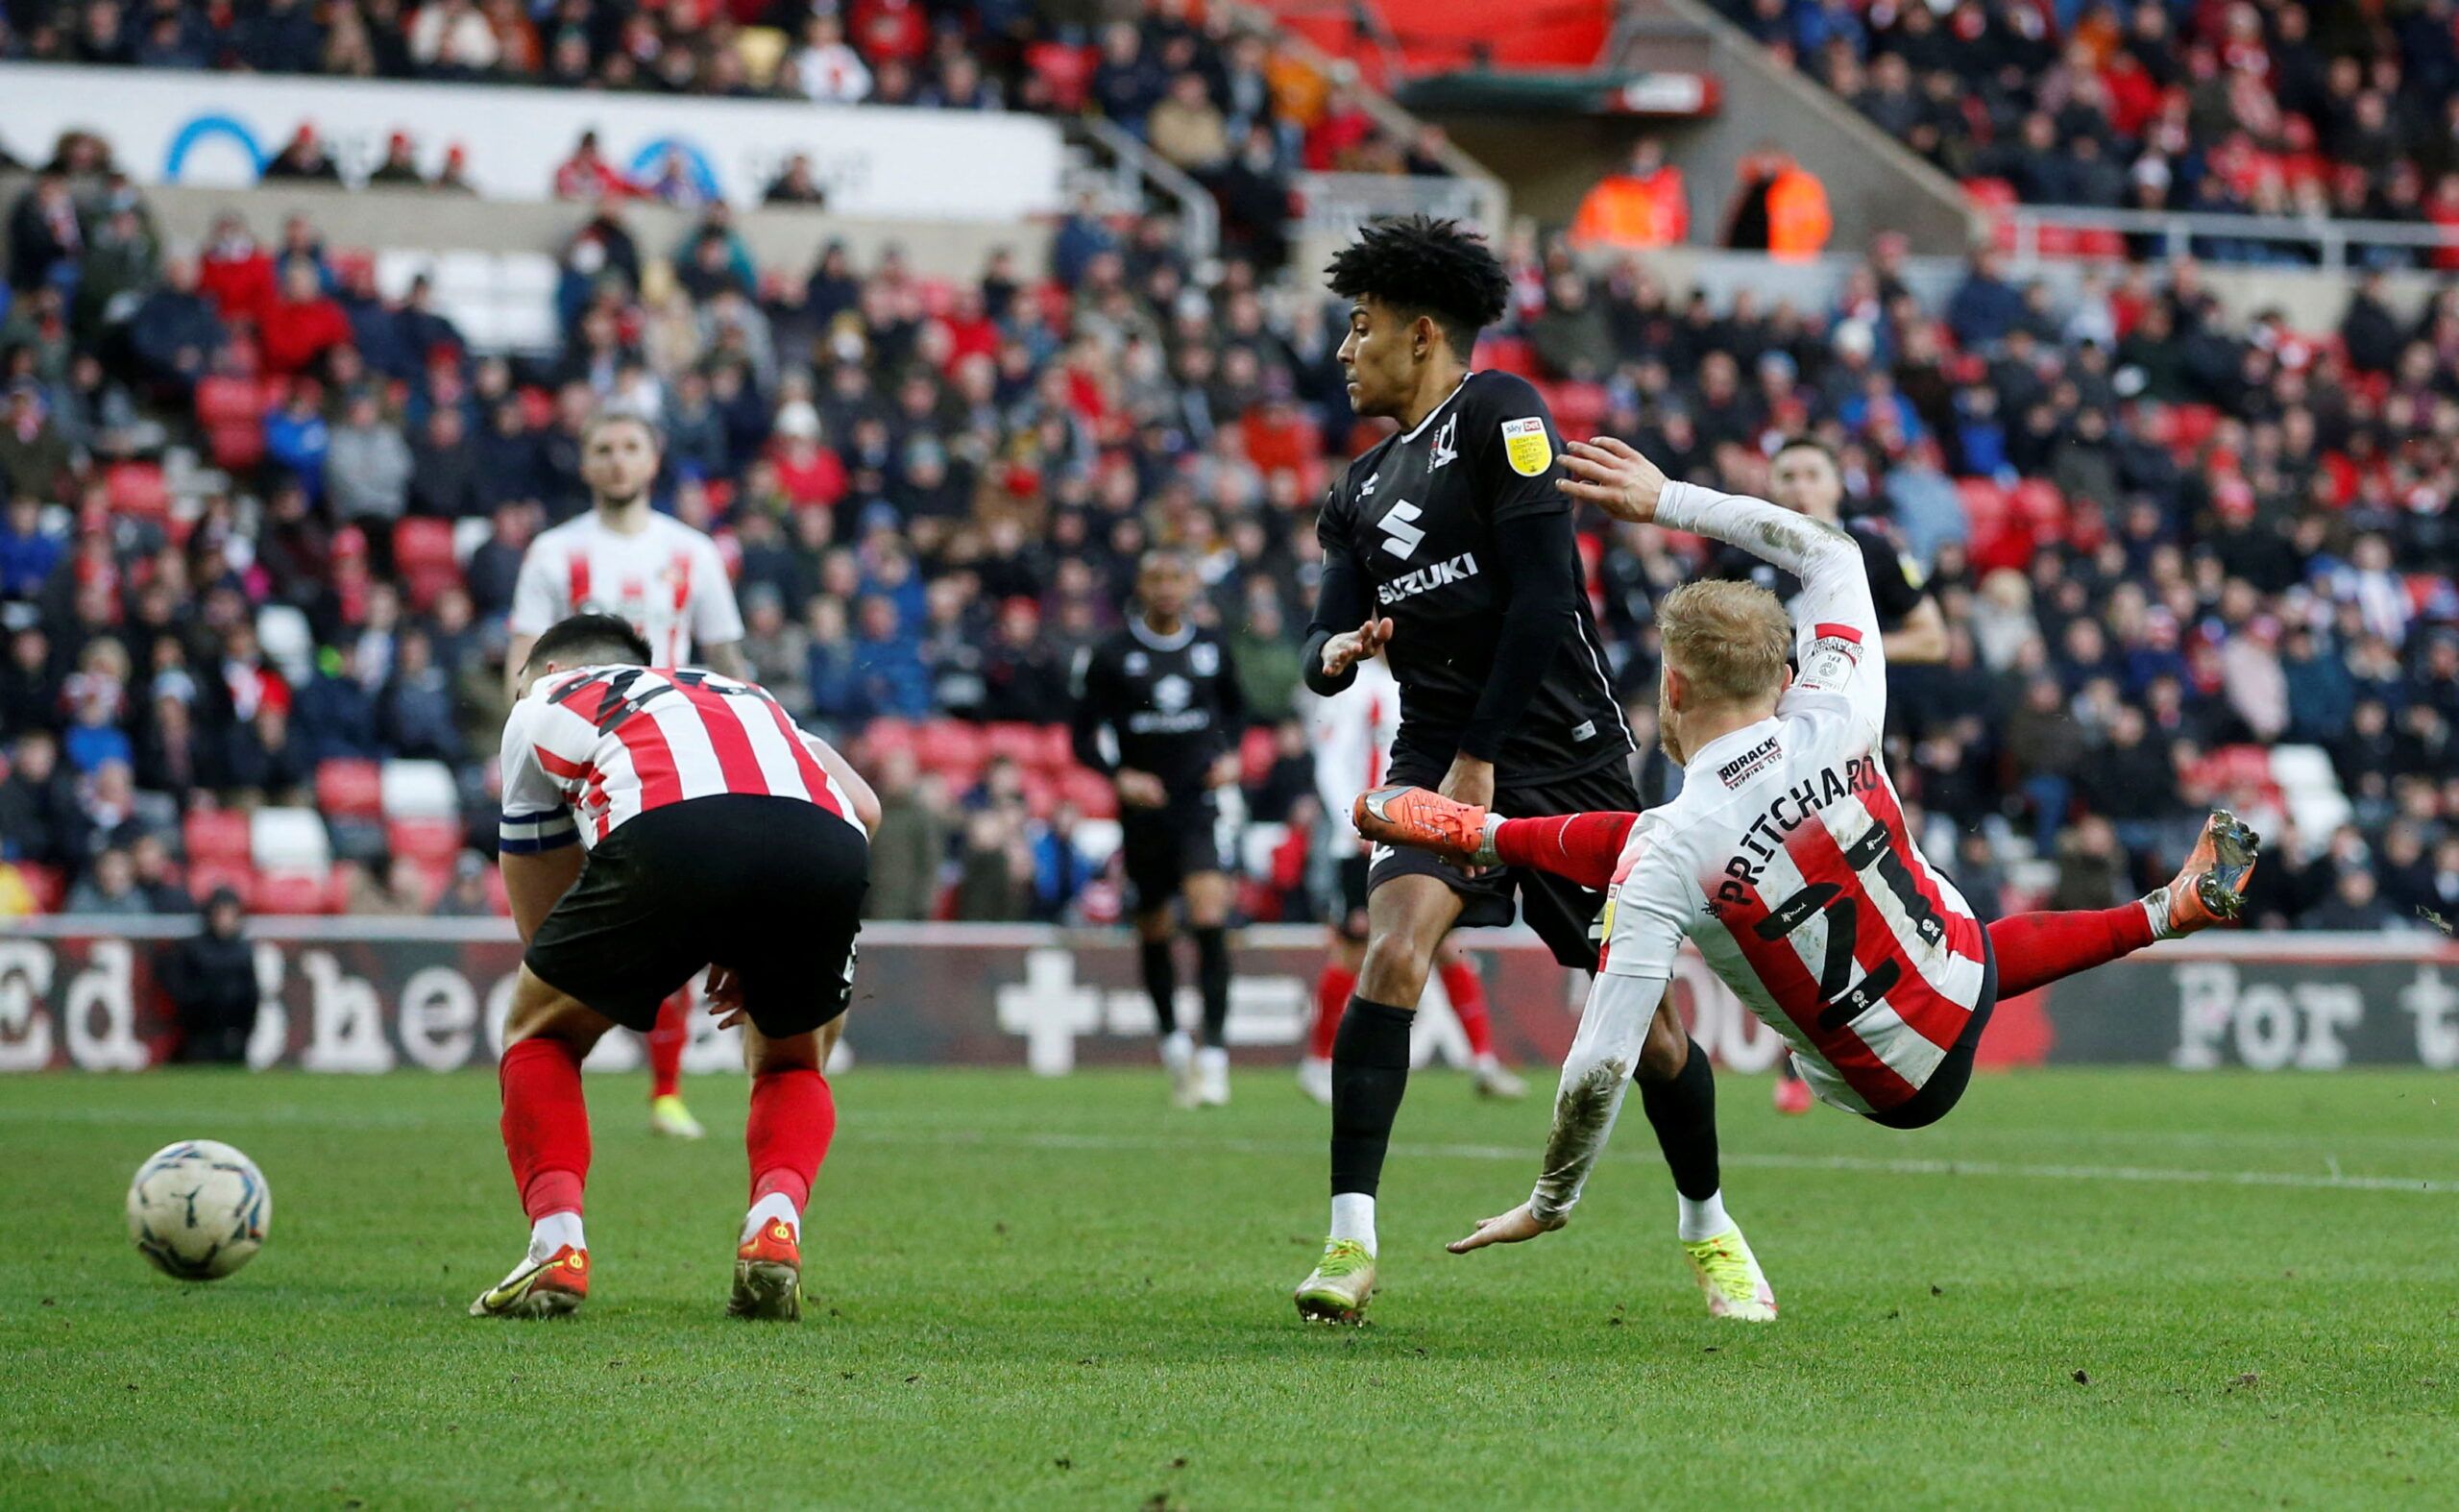 Soccer Football - Sunderland v Milton Keynes Dons - Stadium of Light, Sunderland, Britain - February 19, 2022 Sunderland's Alex Pritchard shoots at goal  Action Images/Ed Sykes??EDITORIAL USE ONLY. No use with unauthorized audio, video, data, fixture lists, club/league logos or 